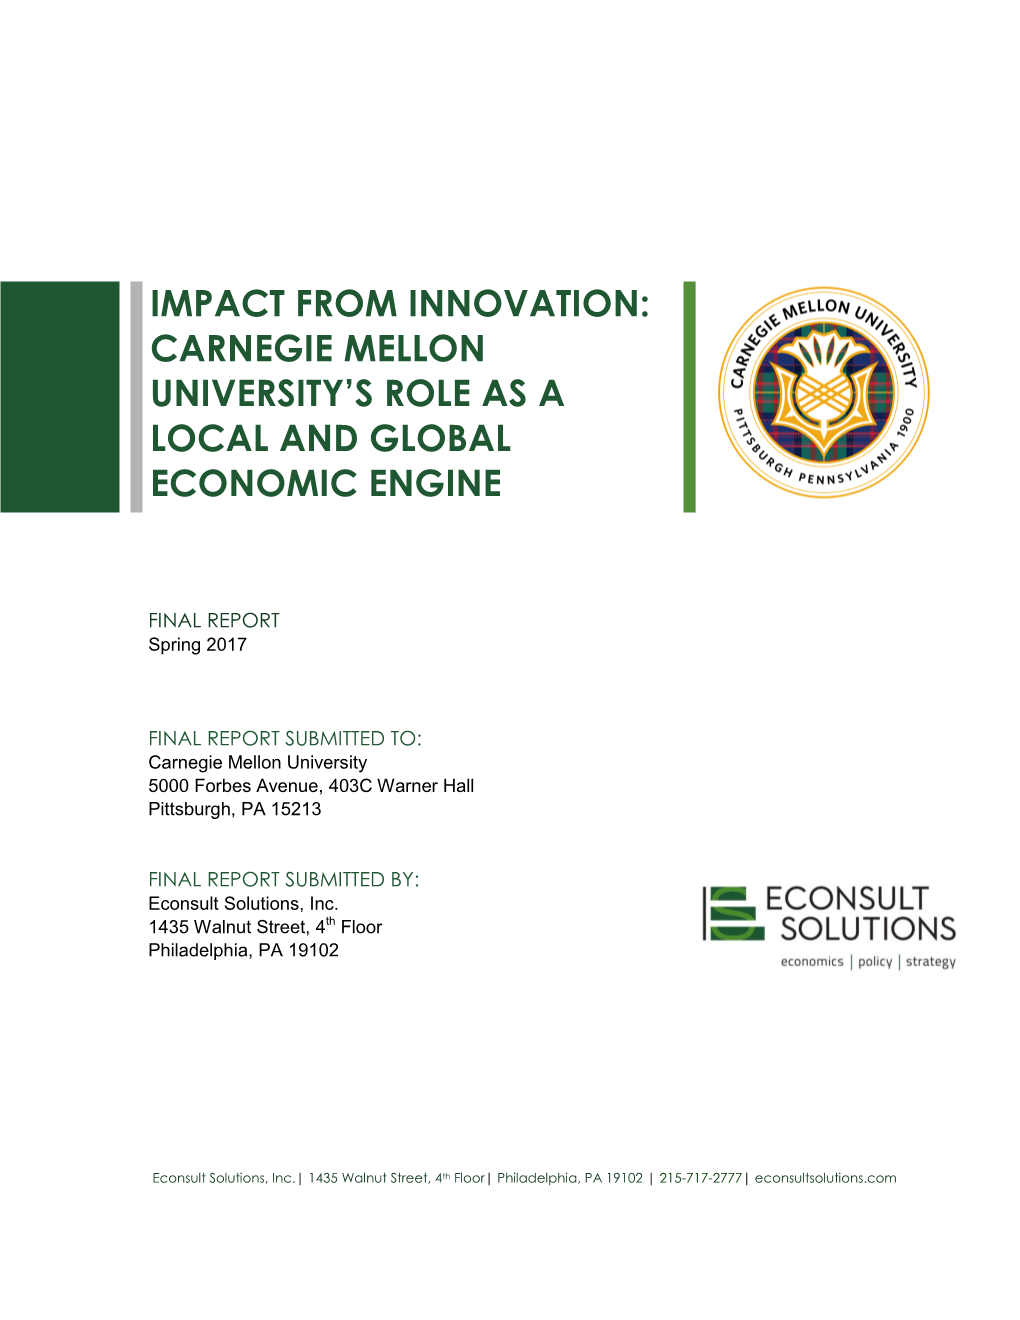 Carnegie Mellon University's Role As a Local and Global Economic Engine